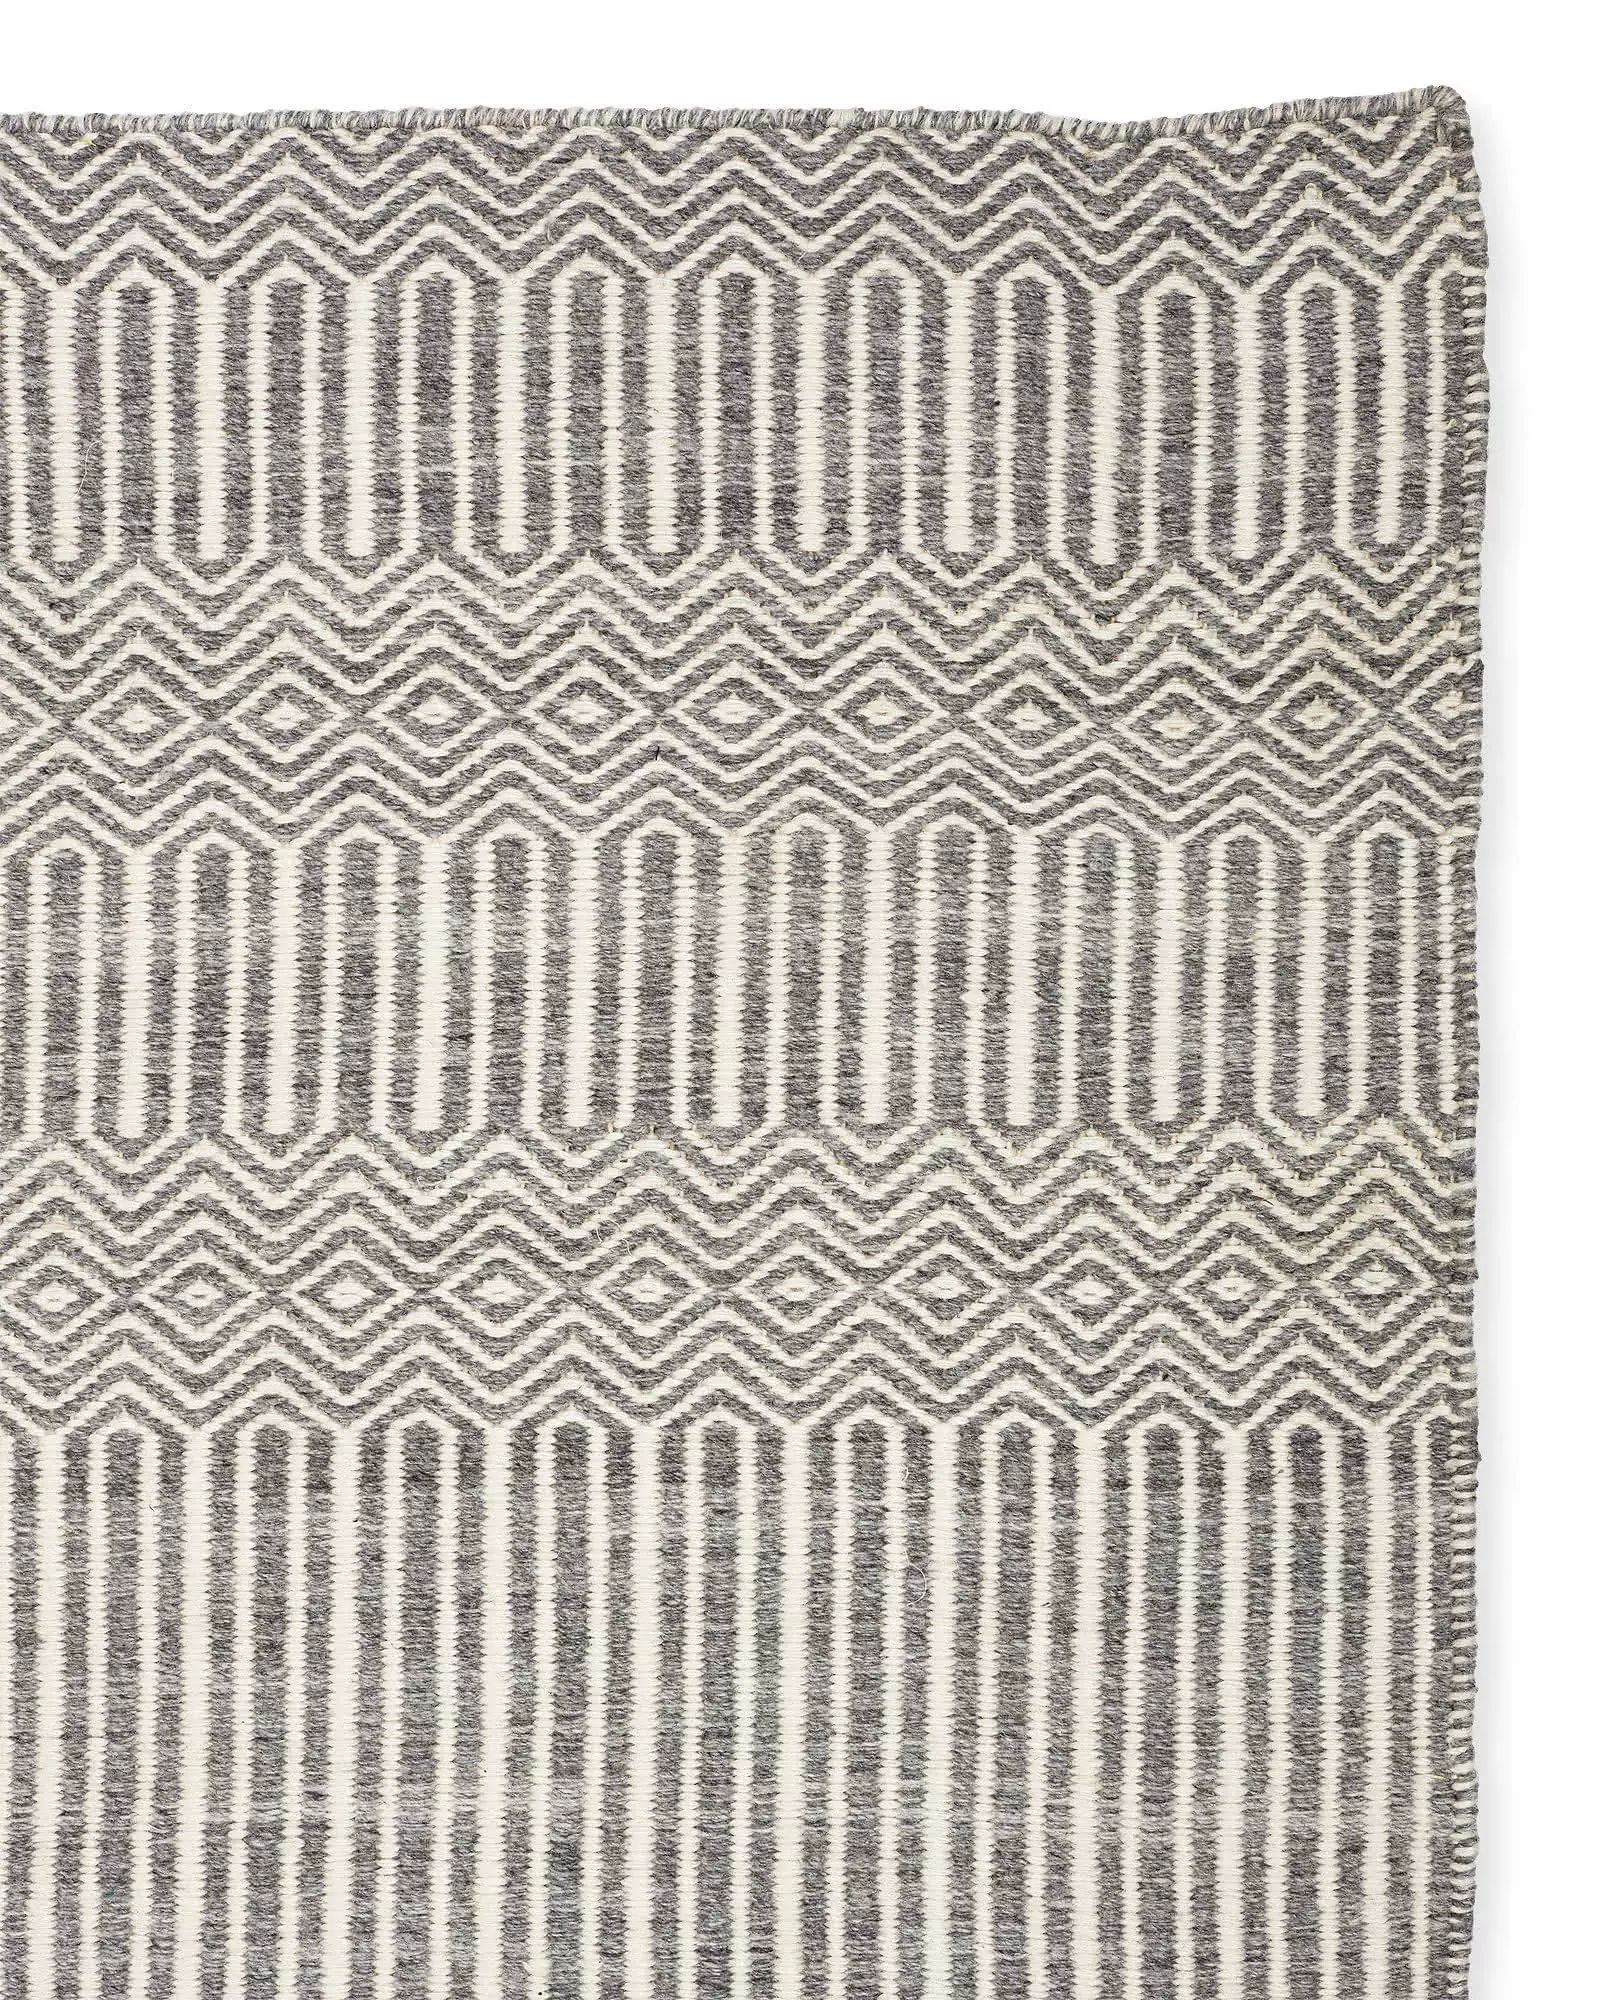 Turnstone Rug | Serena and Lily